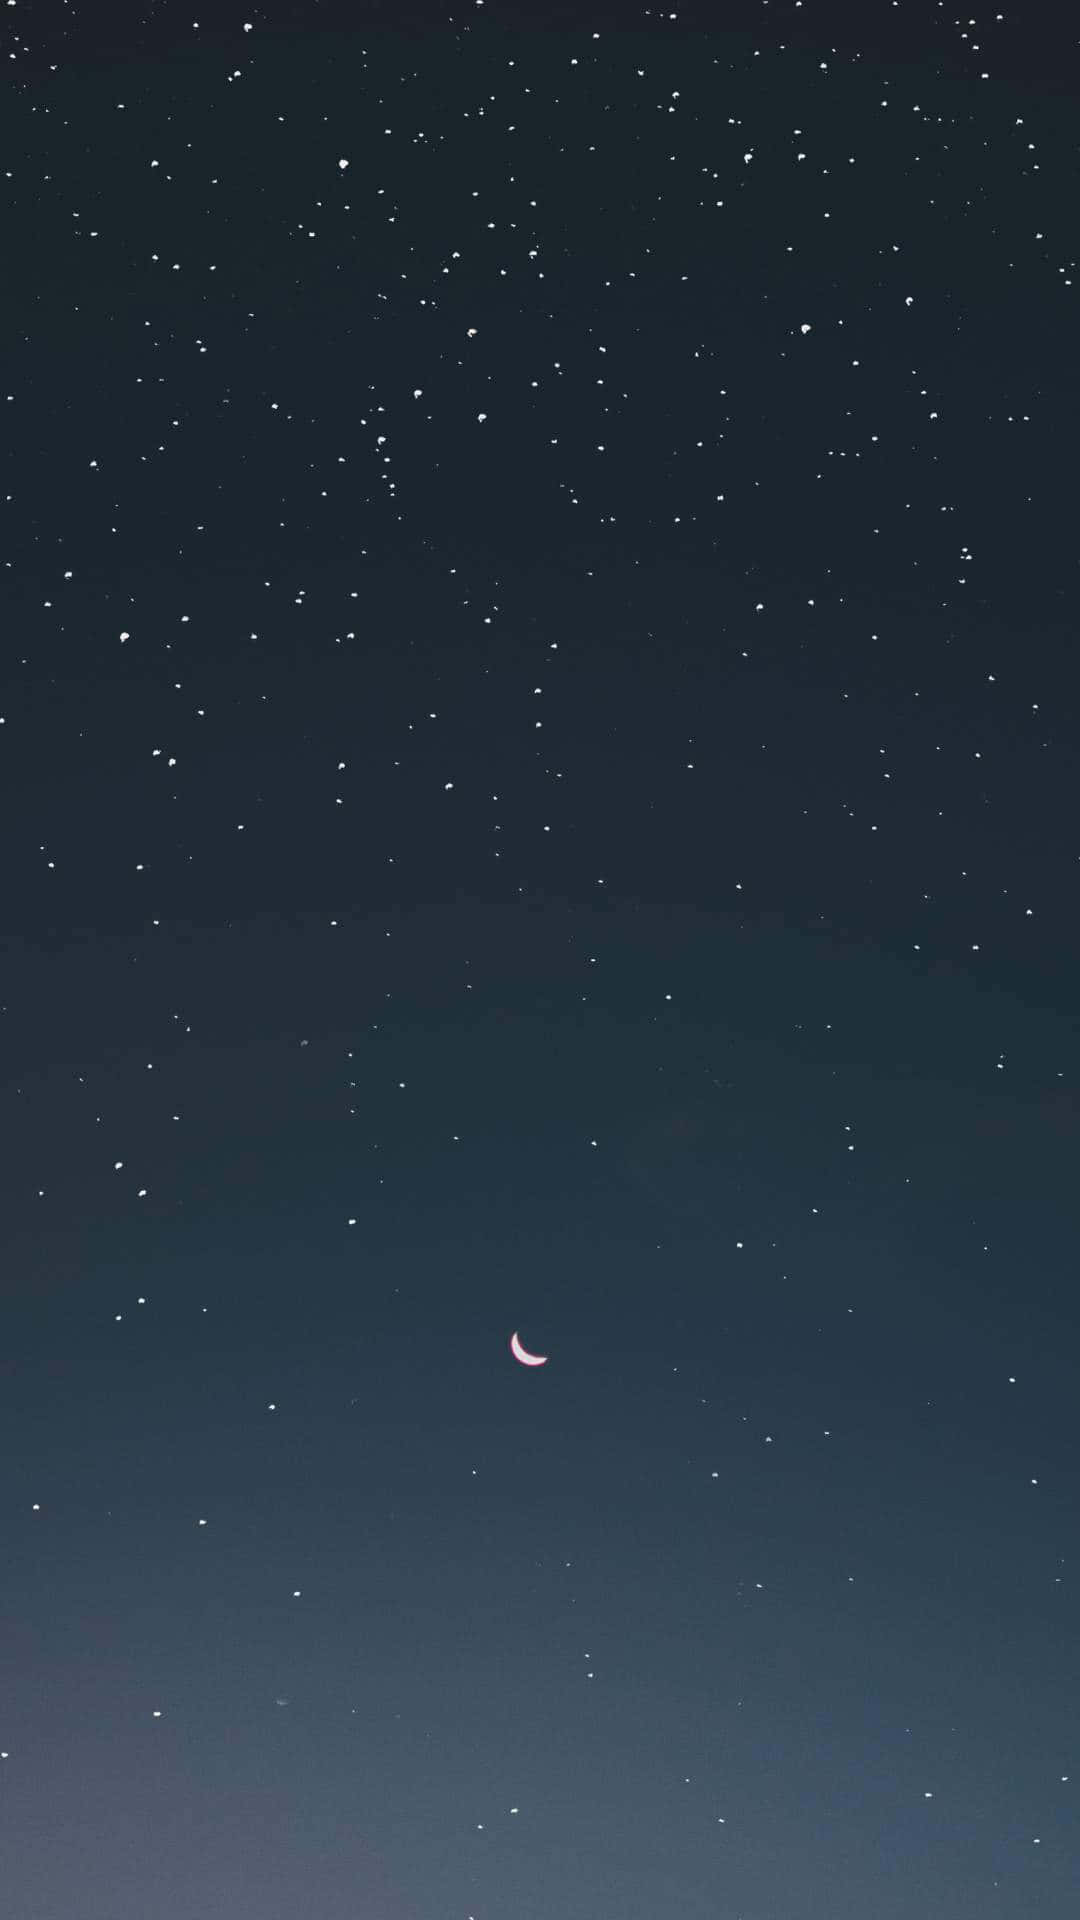 Looking up and discovering the moon and stars in all their beauty Wallpaper